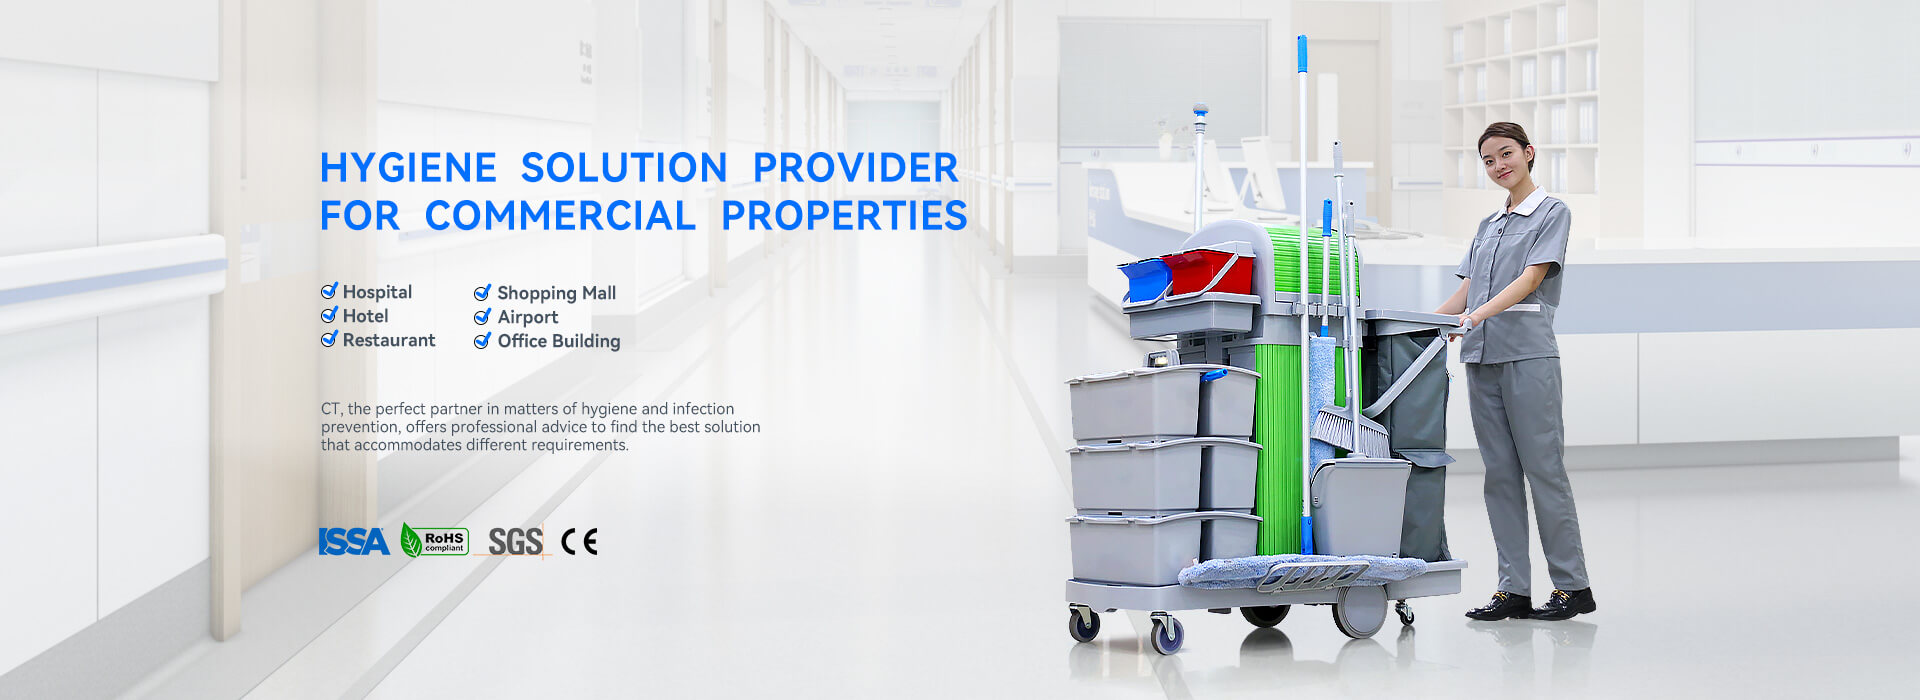 HYGIENE SOLUTION PROVIDER FOR COMMERCIAL PROPERTIES